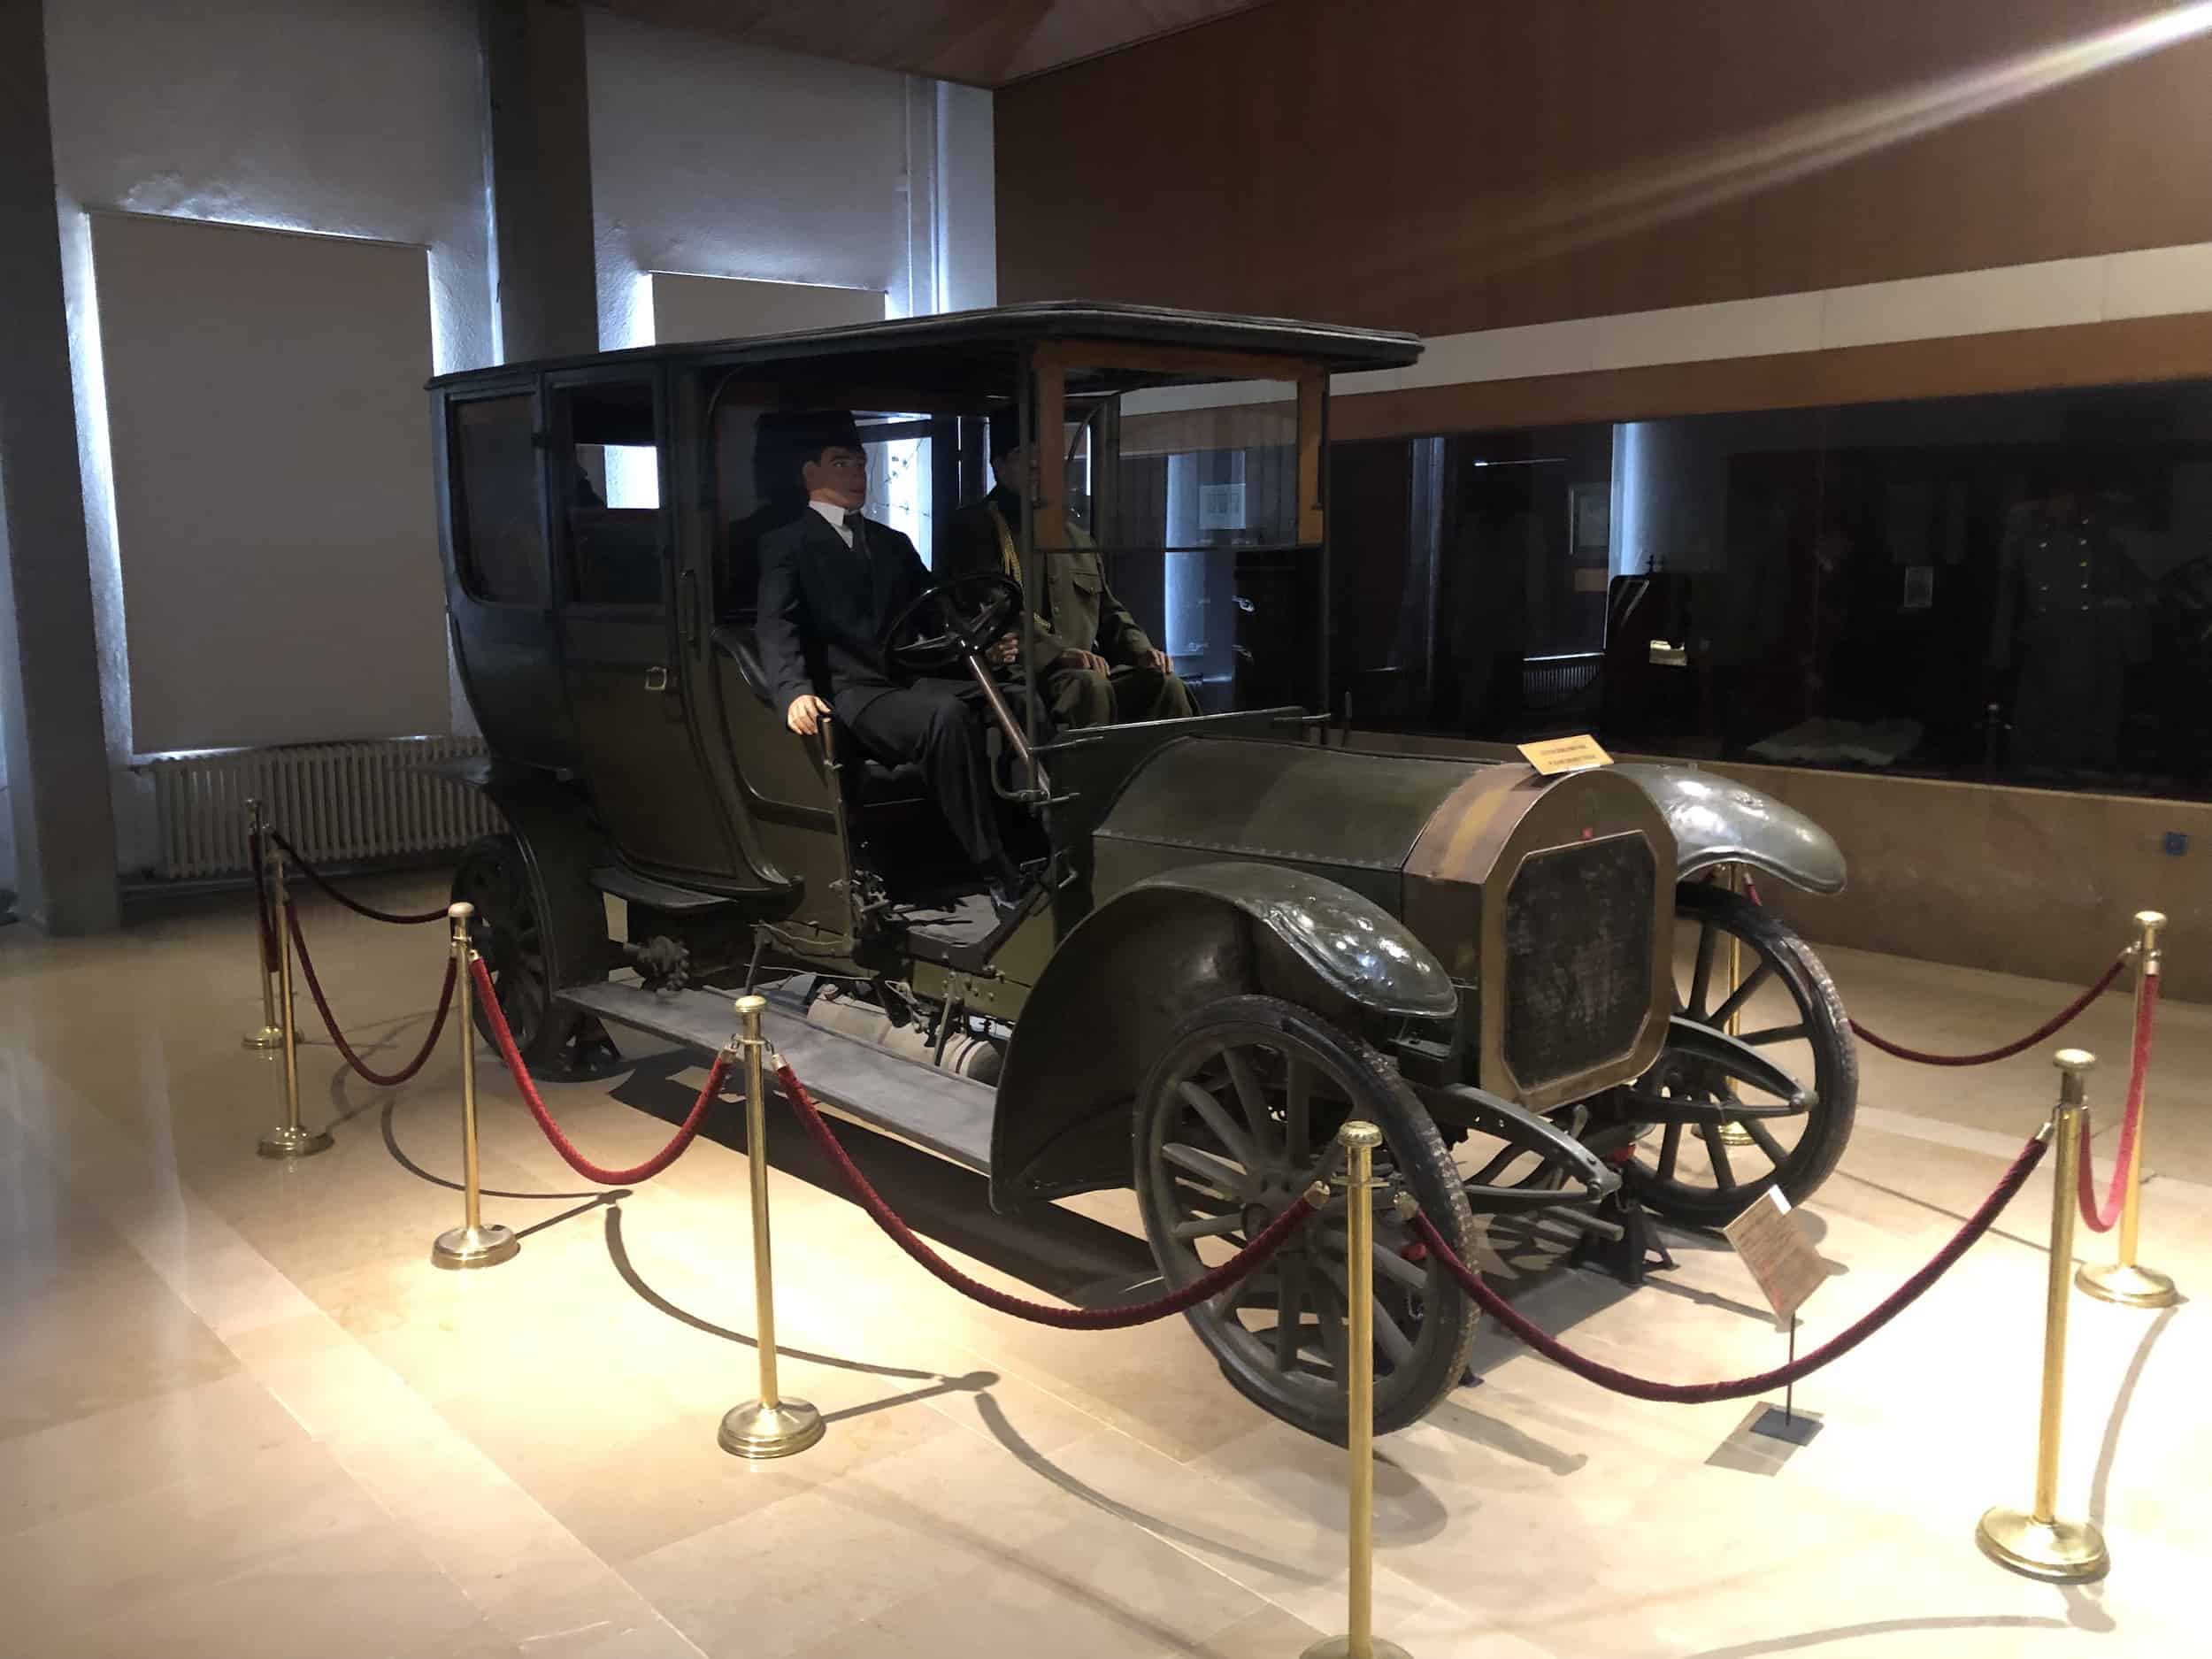 Car in which Mahmud Şevket Pasha was assassinated in the Mahmud Şevket Pasha Hall at the Harbiye Military Museum in Istanbul, Turkey